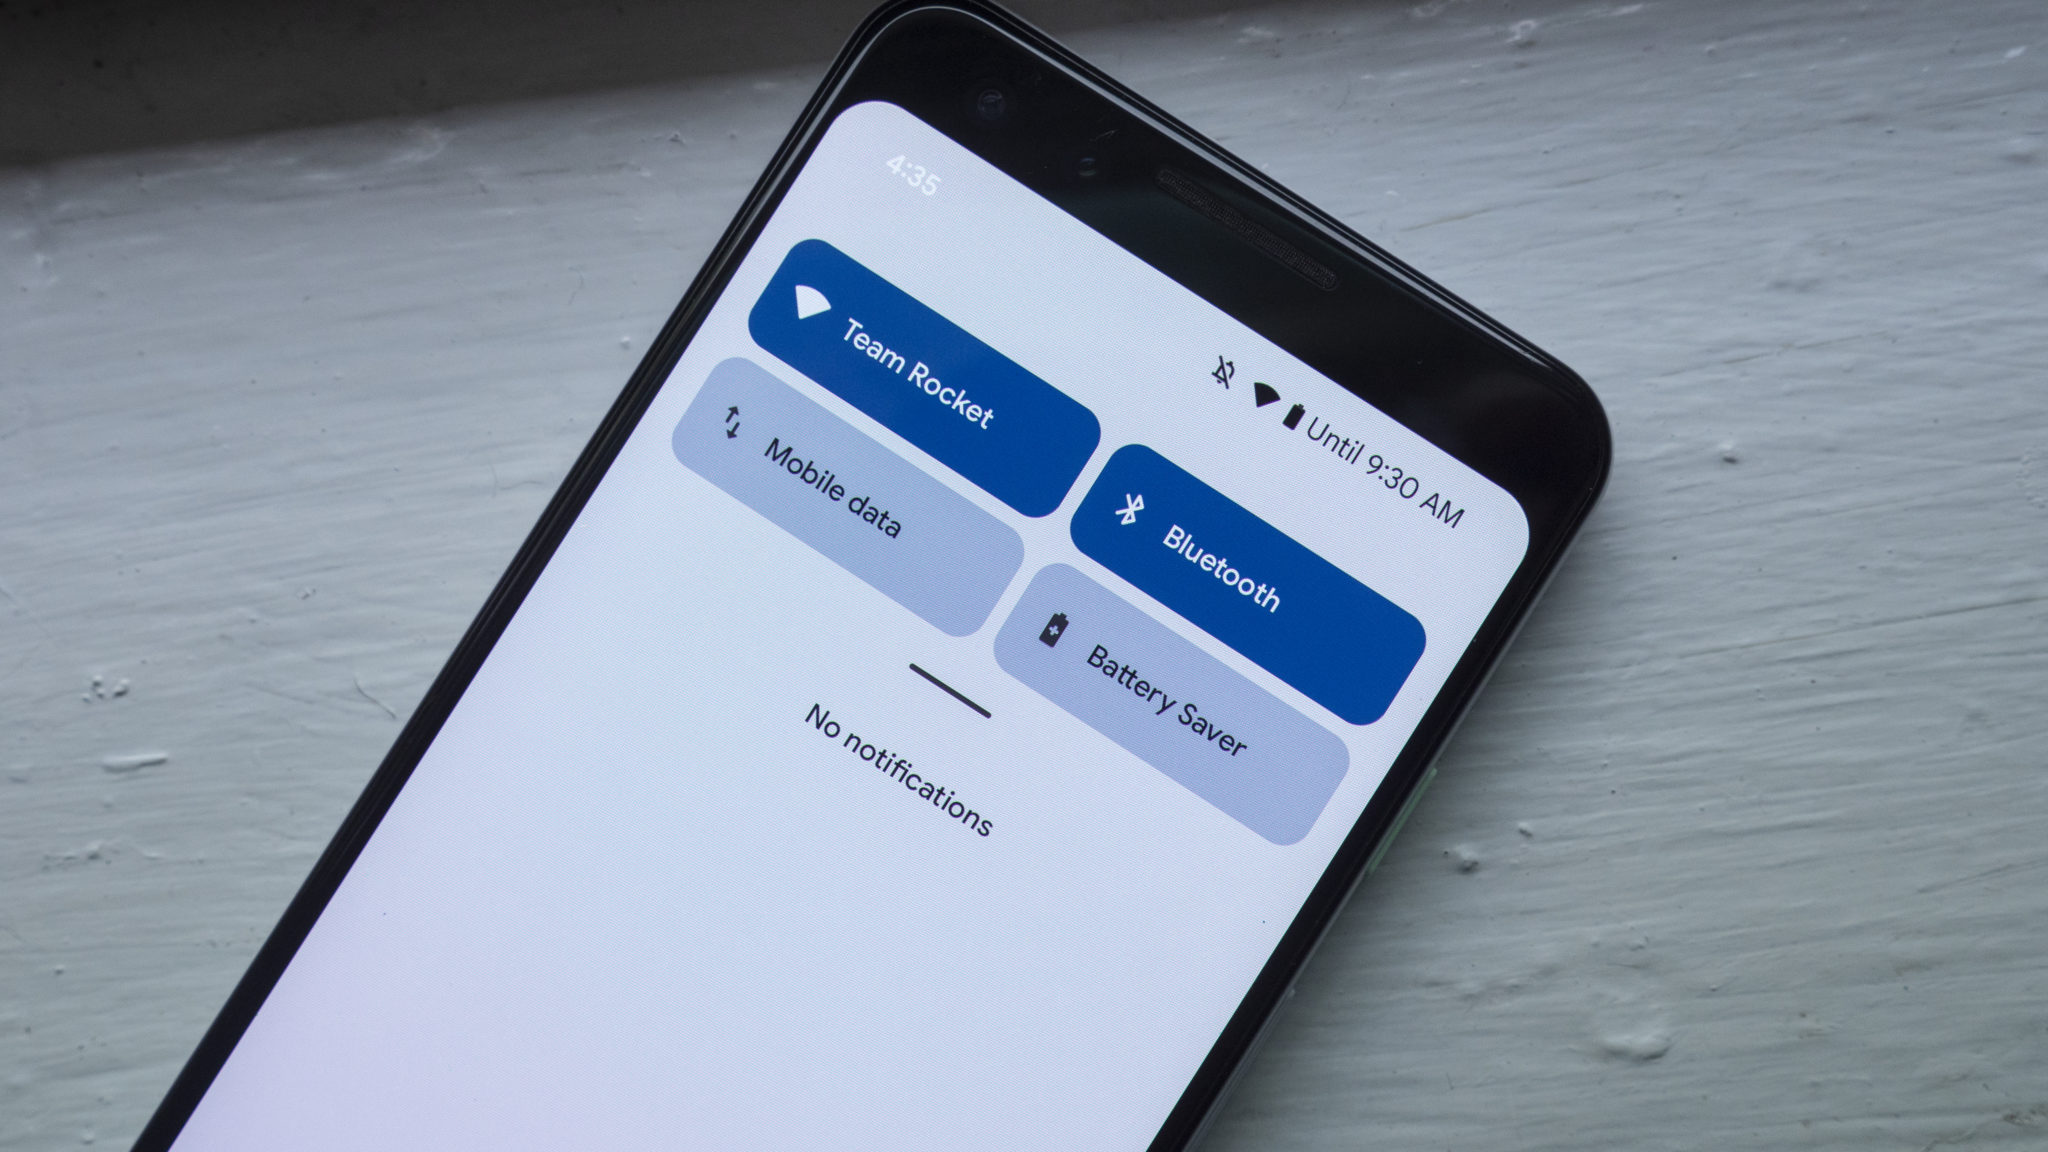 What to do if your phone won't connect to Wi-Fi - Android Authority